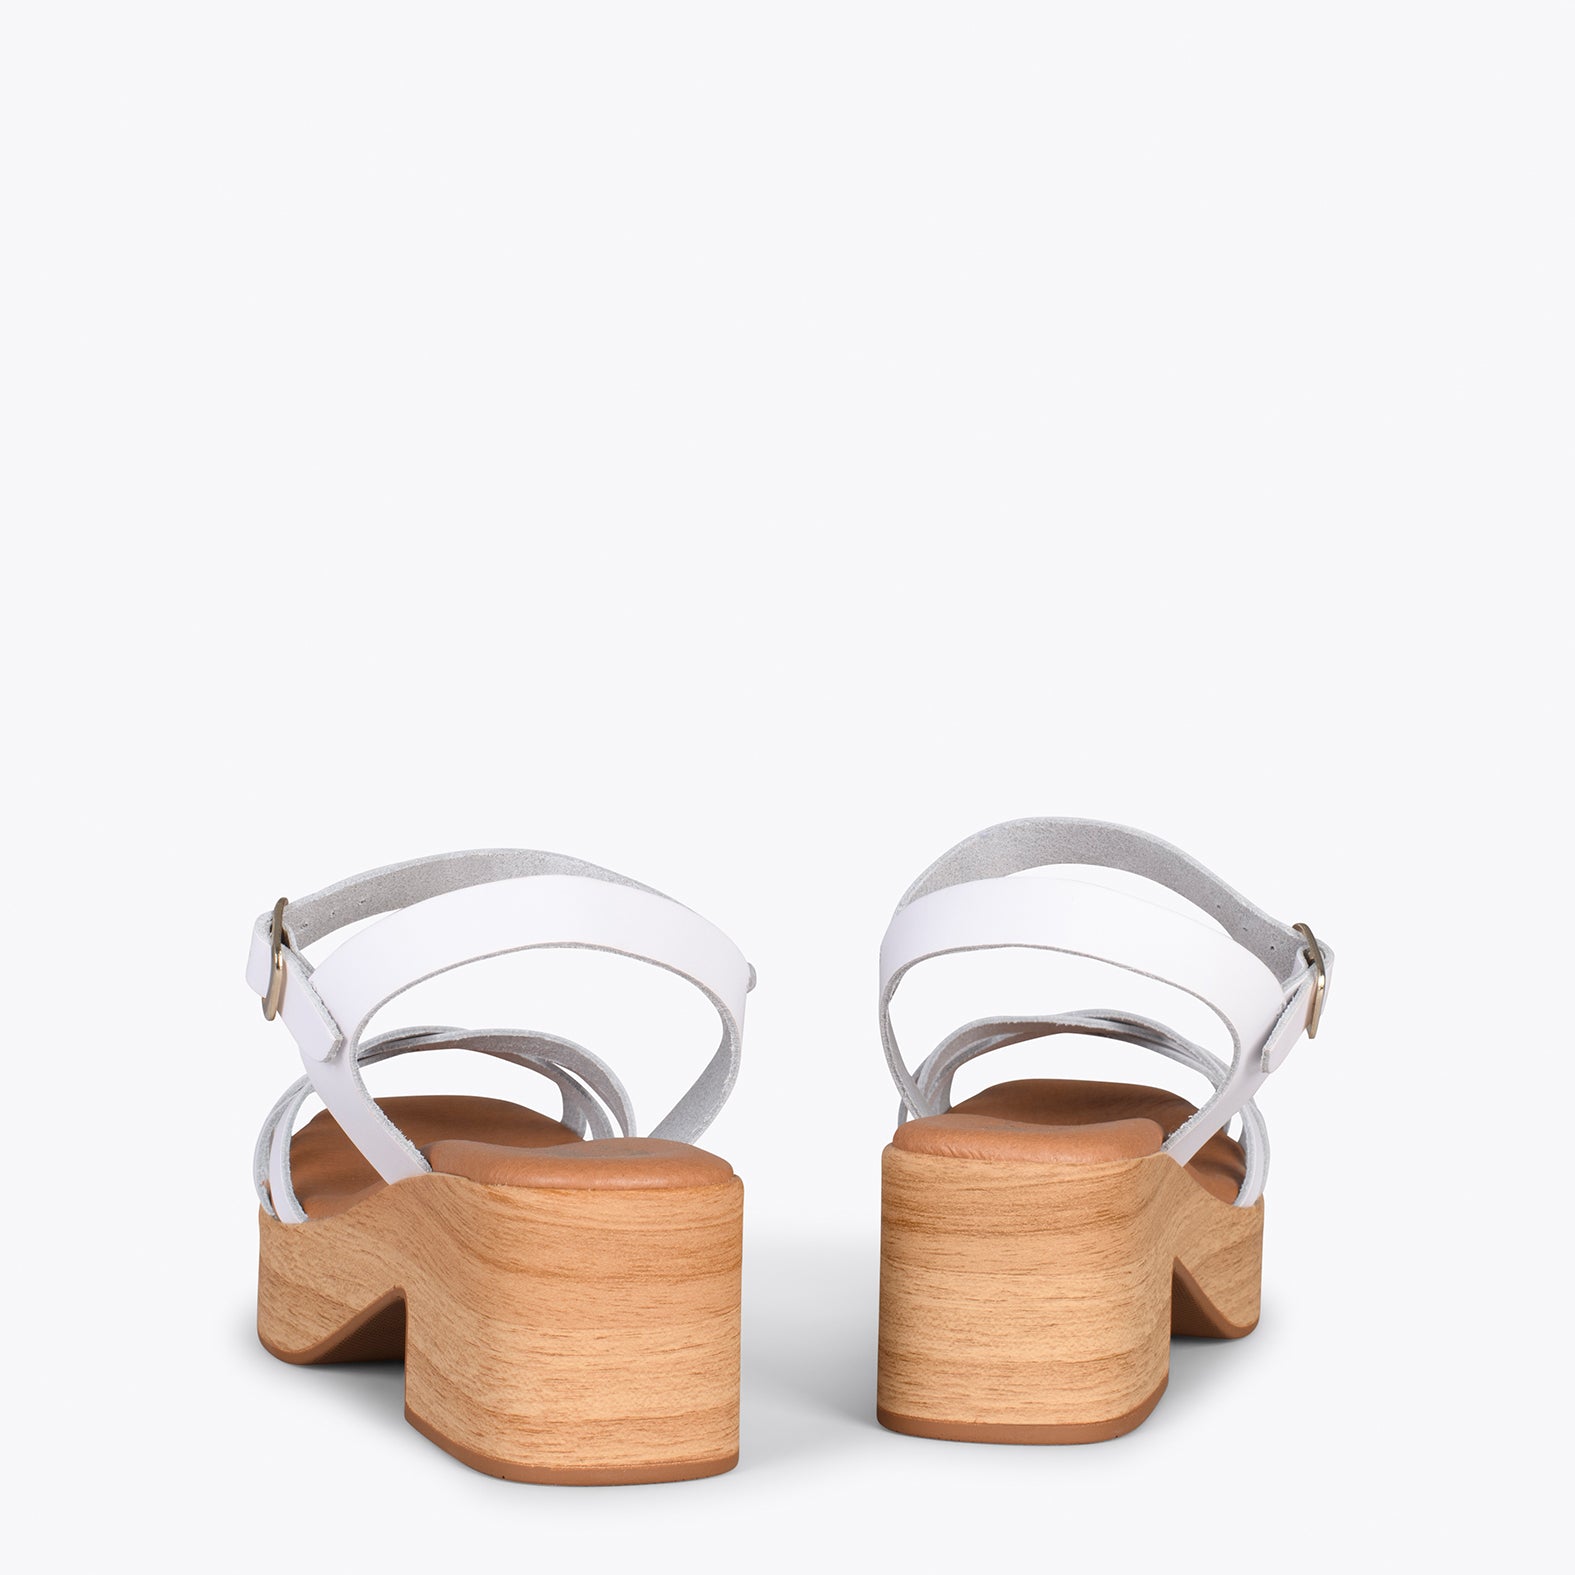 WOOD – WHITE strappy sandal with wooden heel